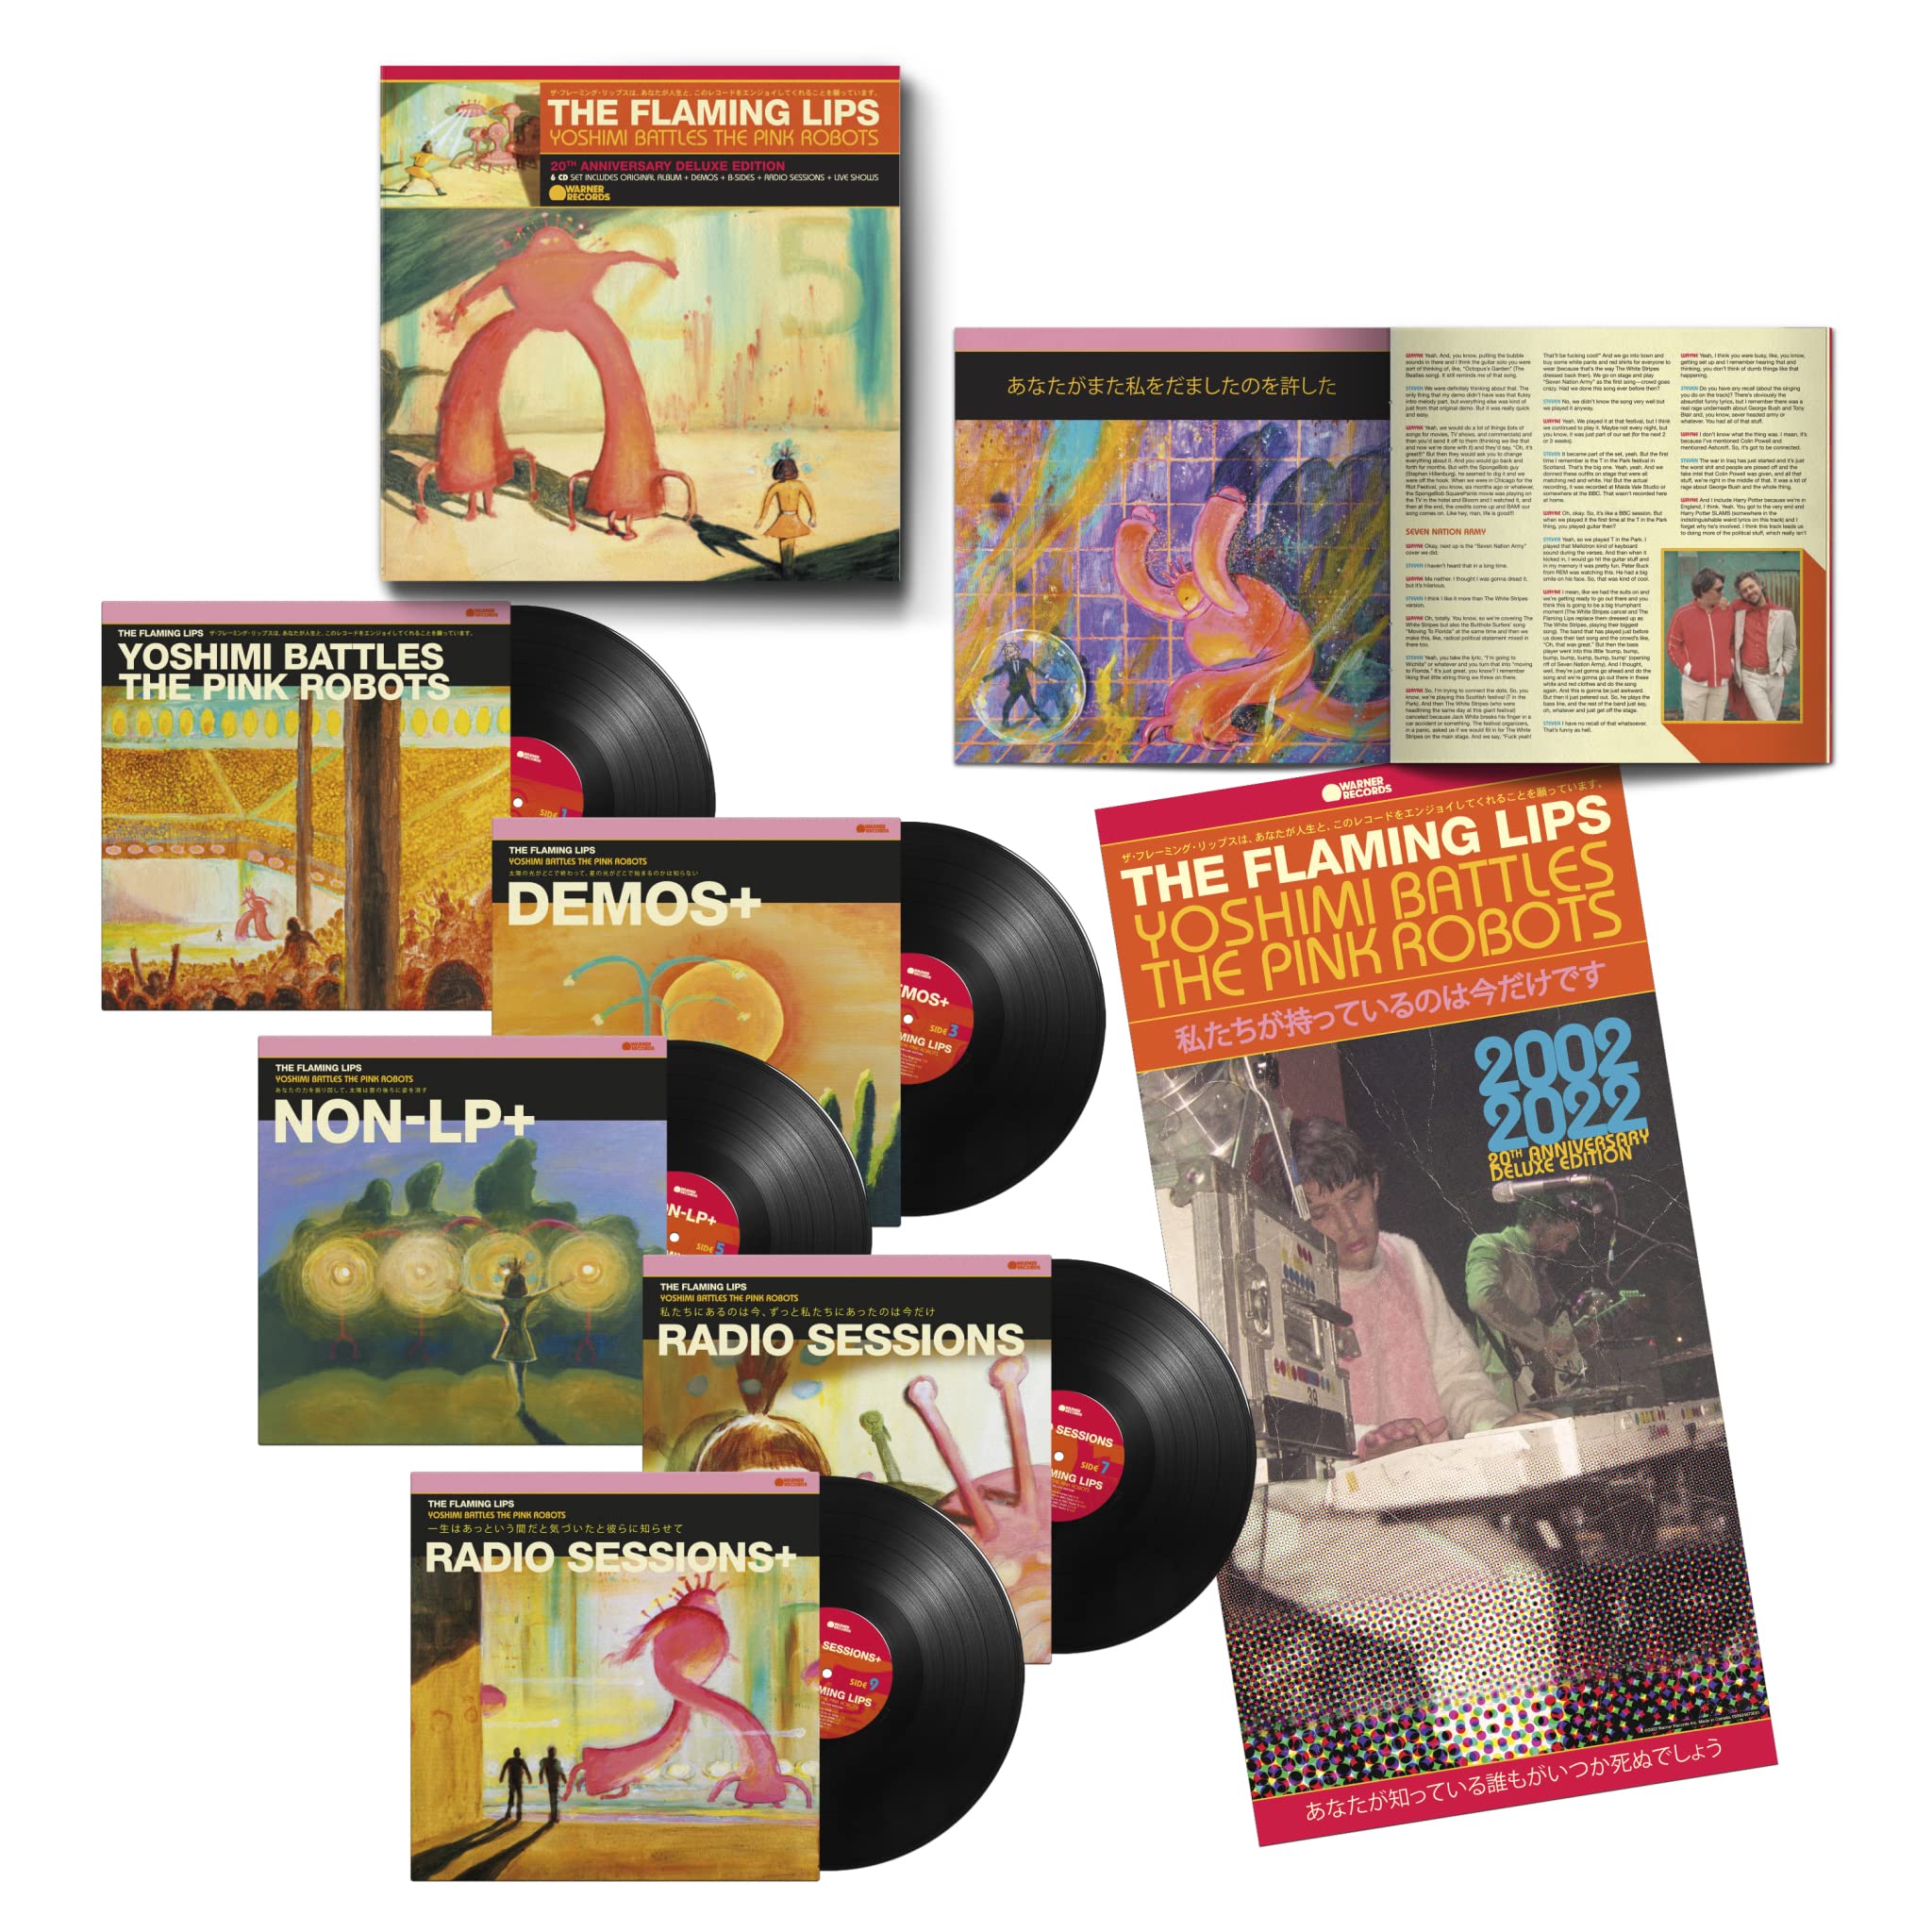 YOSHIMI BATTLES THE PINK ROBOTS (20TH ANNIVERSARY SUPER DELUXE EDITION 5LP) on MovieShack